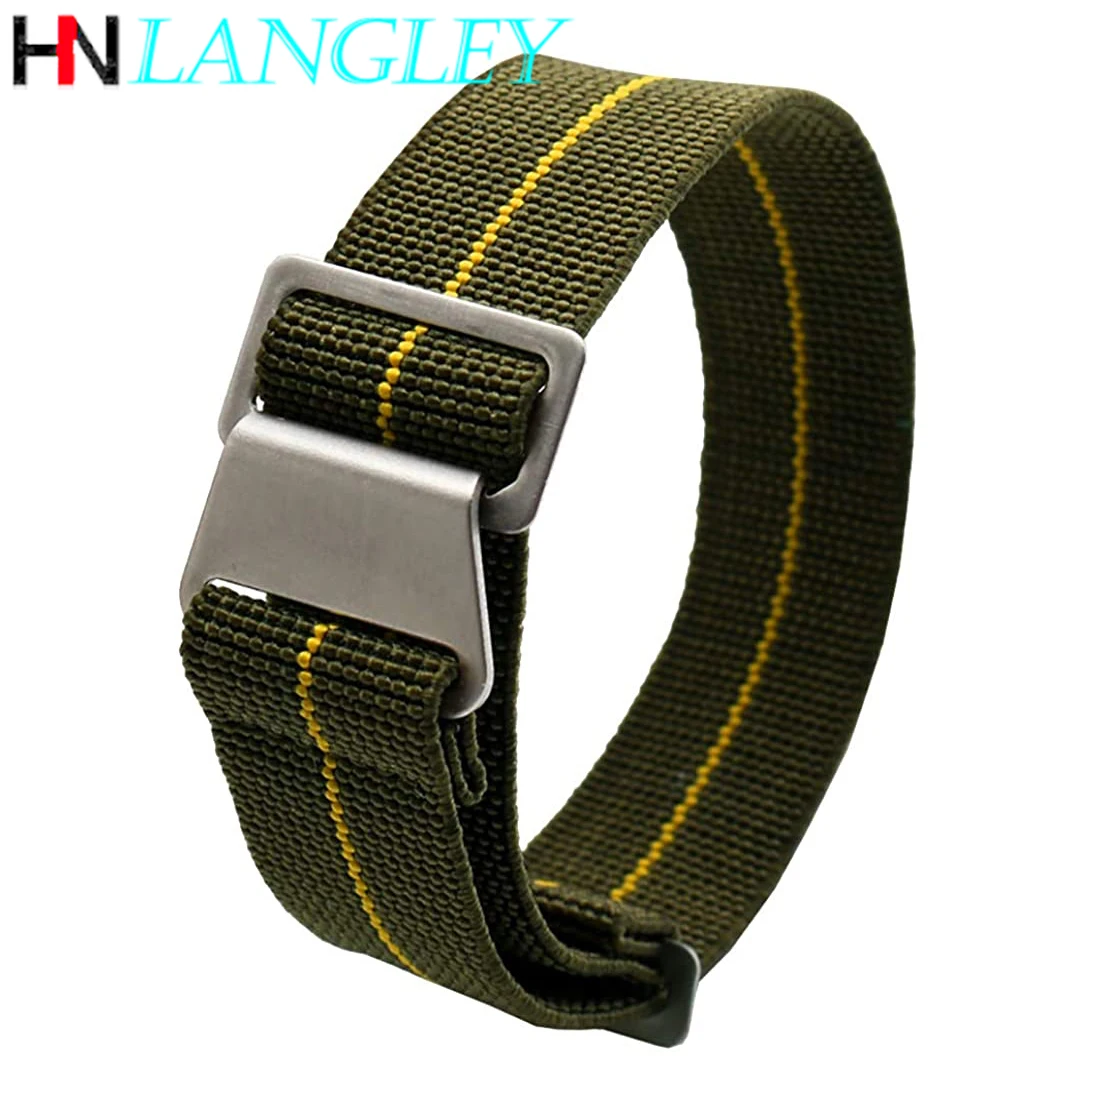 Man's French Troops Military Parachute Watchband Special Elastic Fabric Nylon Canvas Strap Hook Buckle 20/22mm 